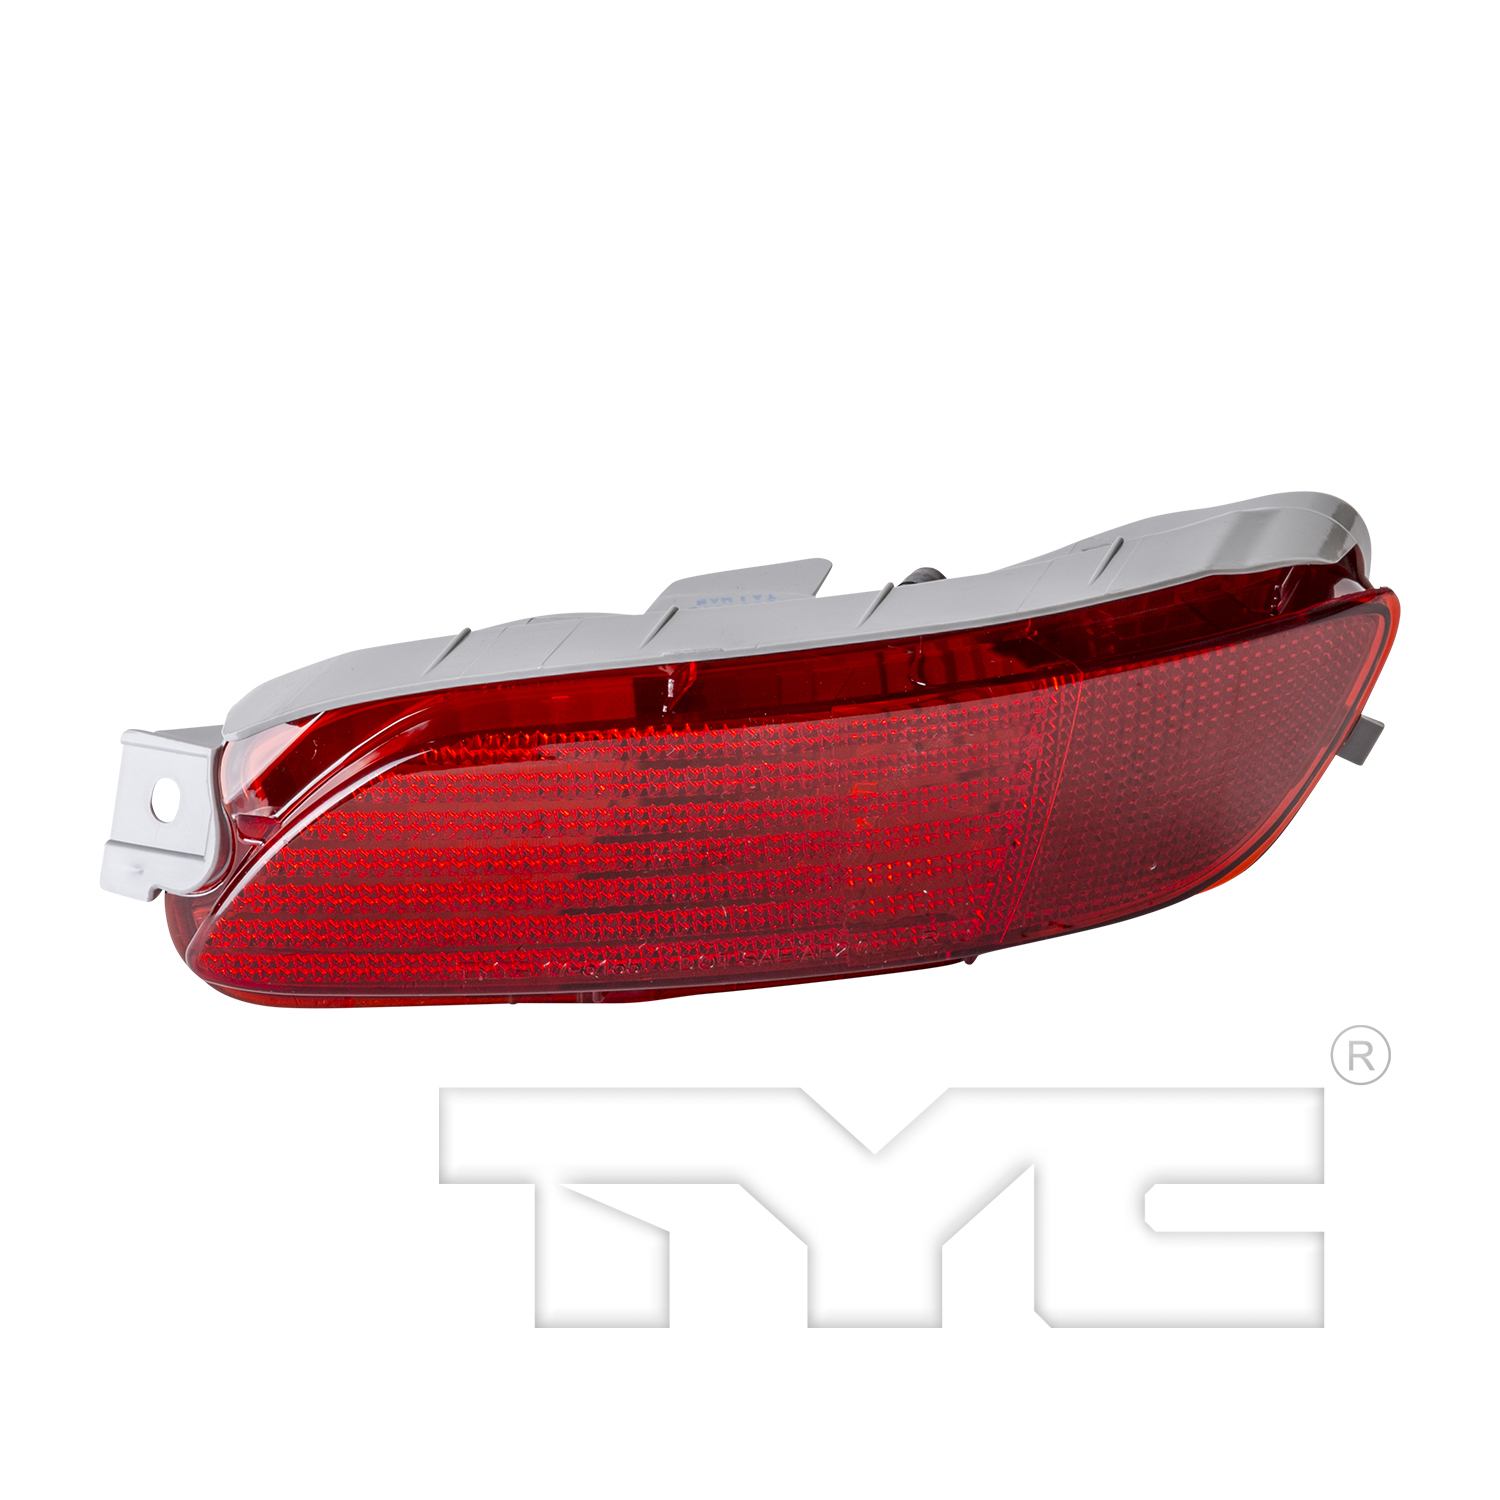 Aftermarket LAMPS for LEXUS - RX400H, RX400h,06-08,RT Rear marker lamp assy